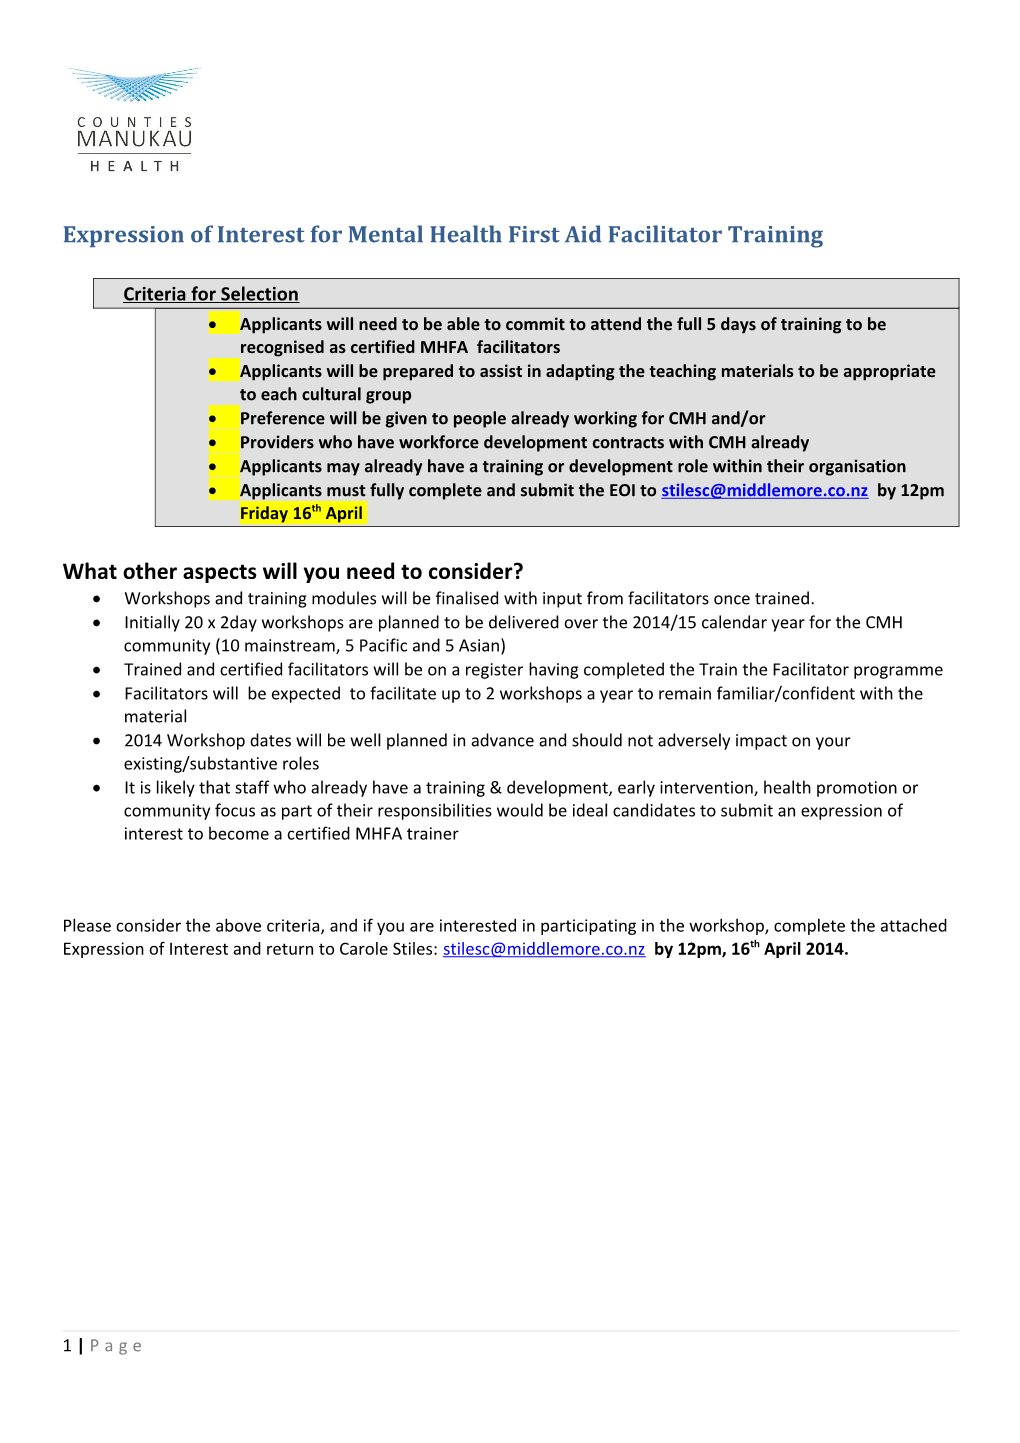 Expression of Interest for Mental Health First Aid Facilitator Training